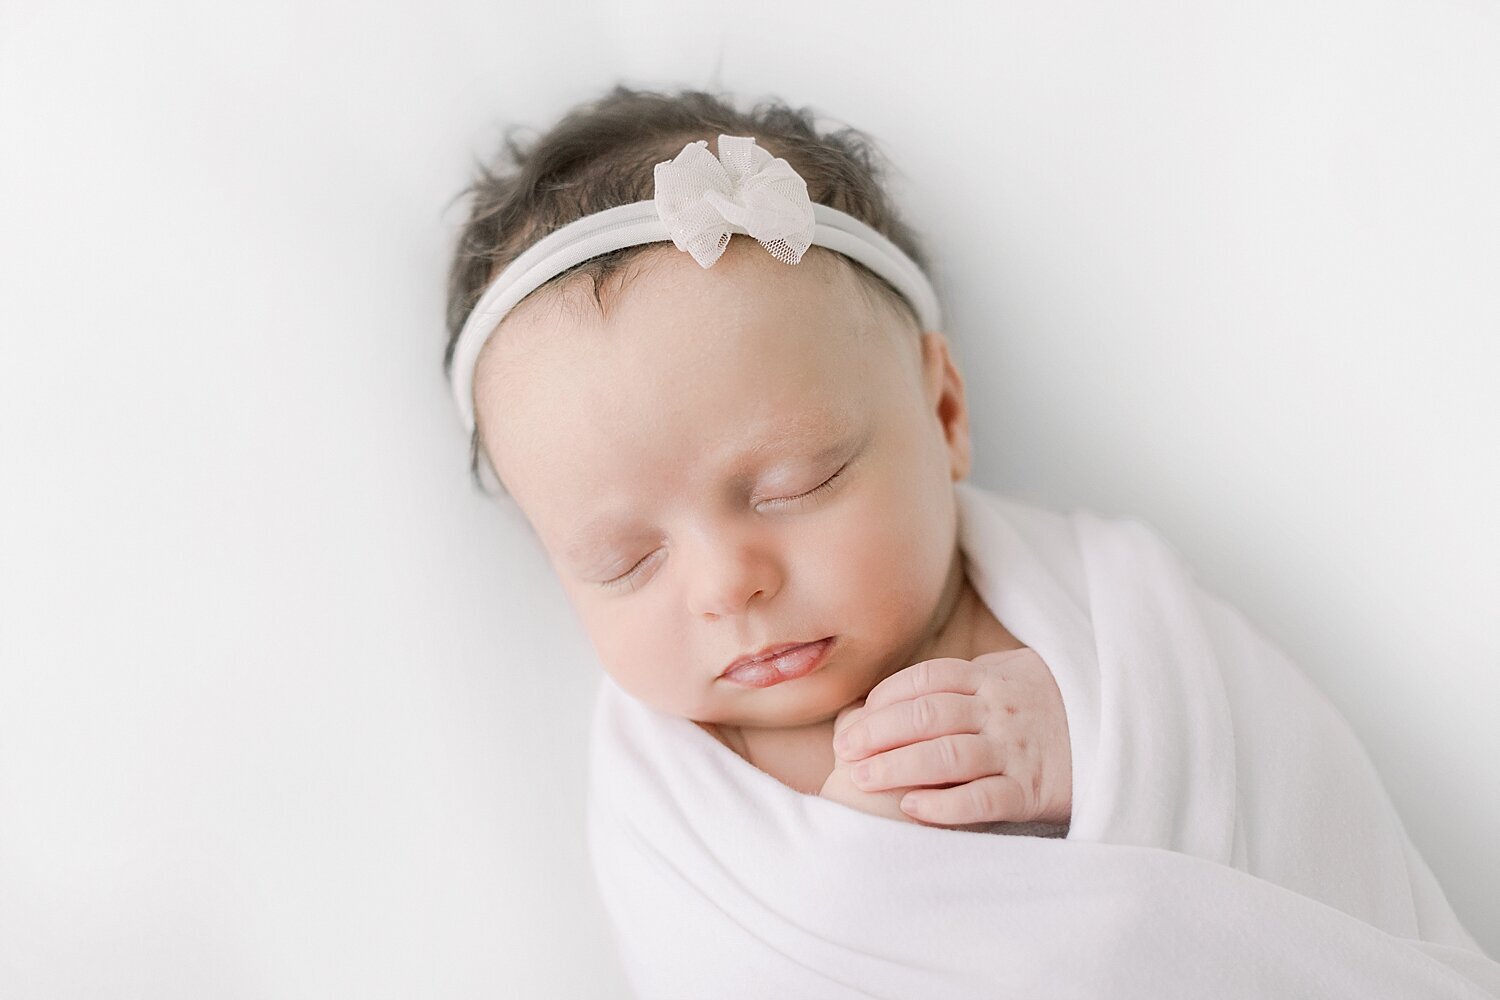 Newborn baby girl sleeping during photoshoot. Photo by Ambre Williams Photography.